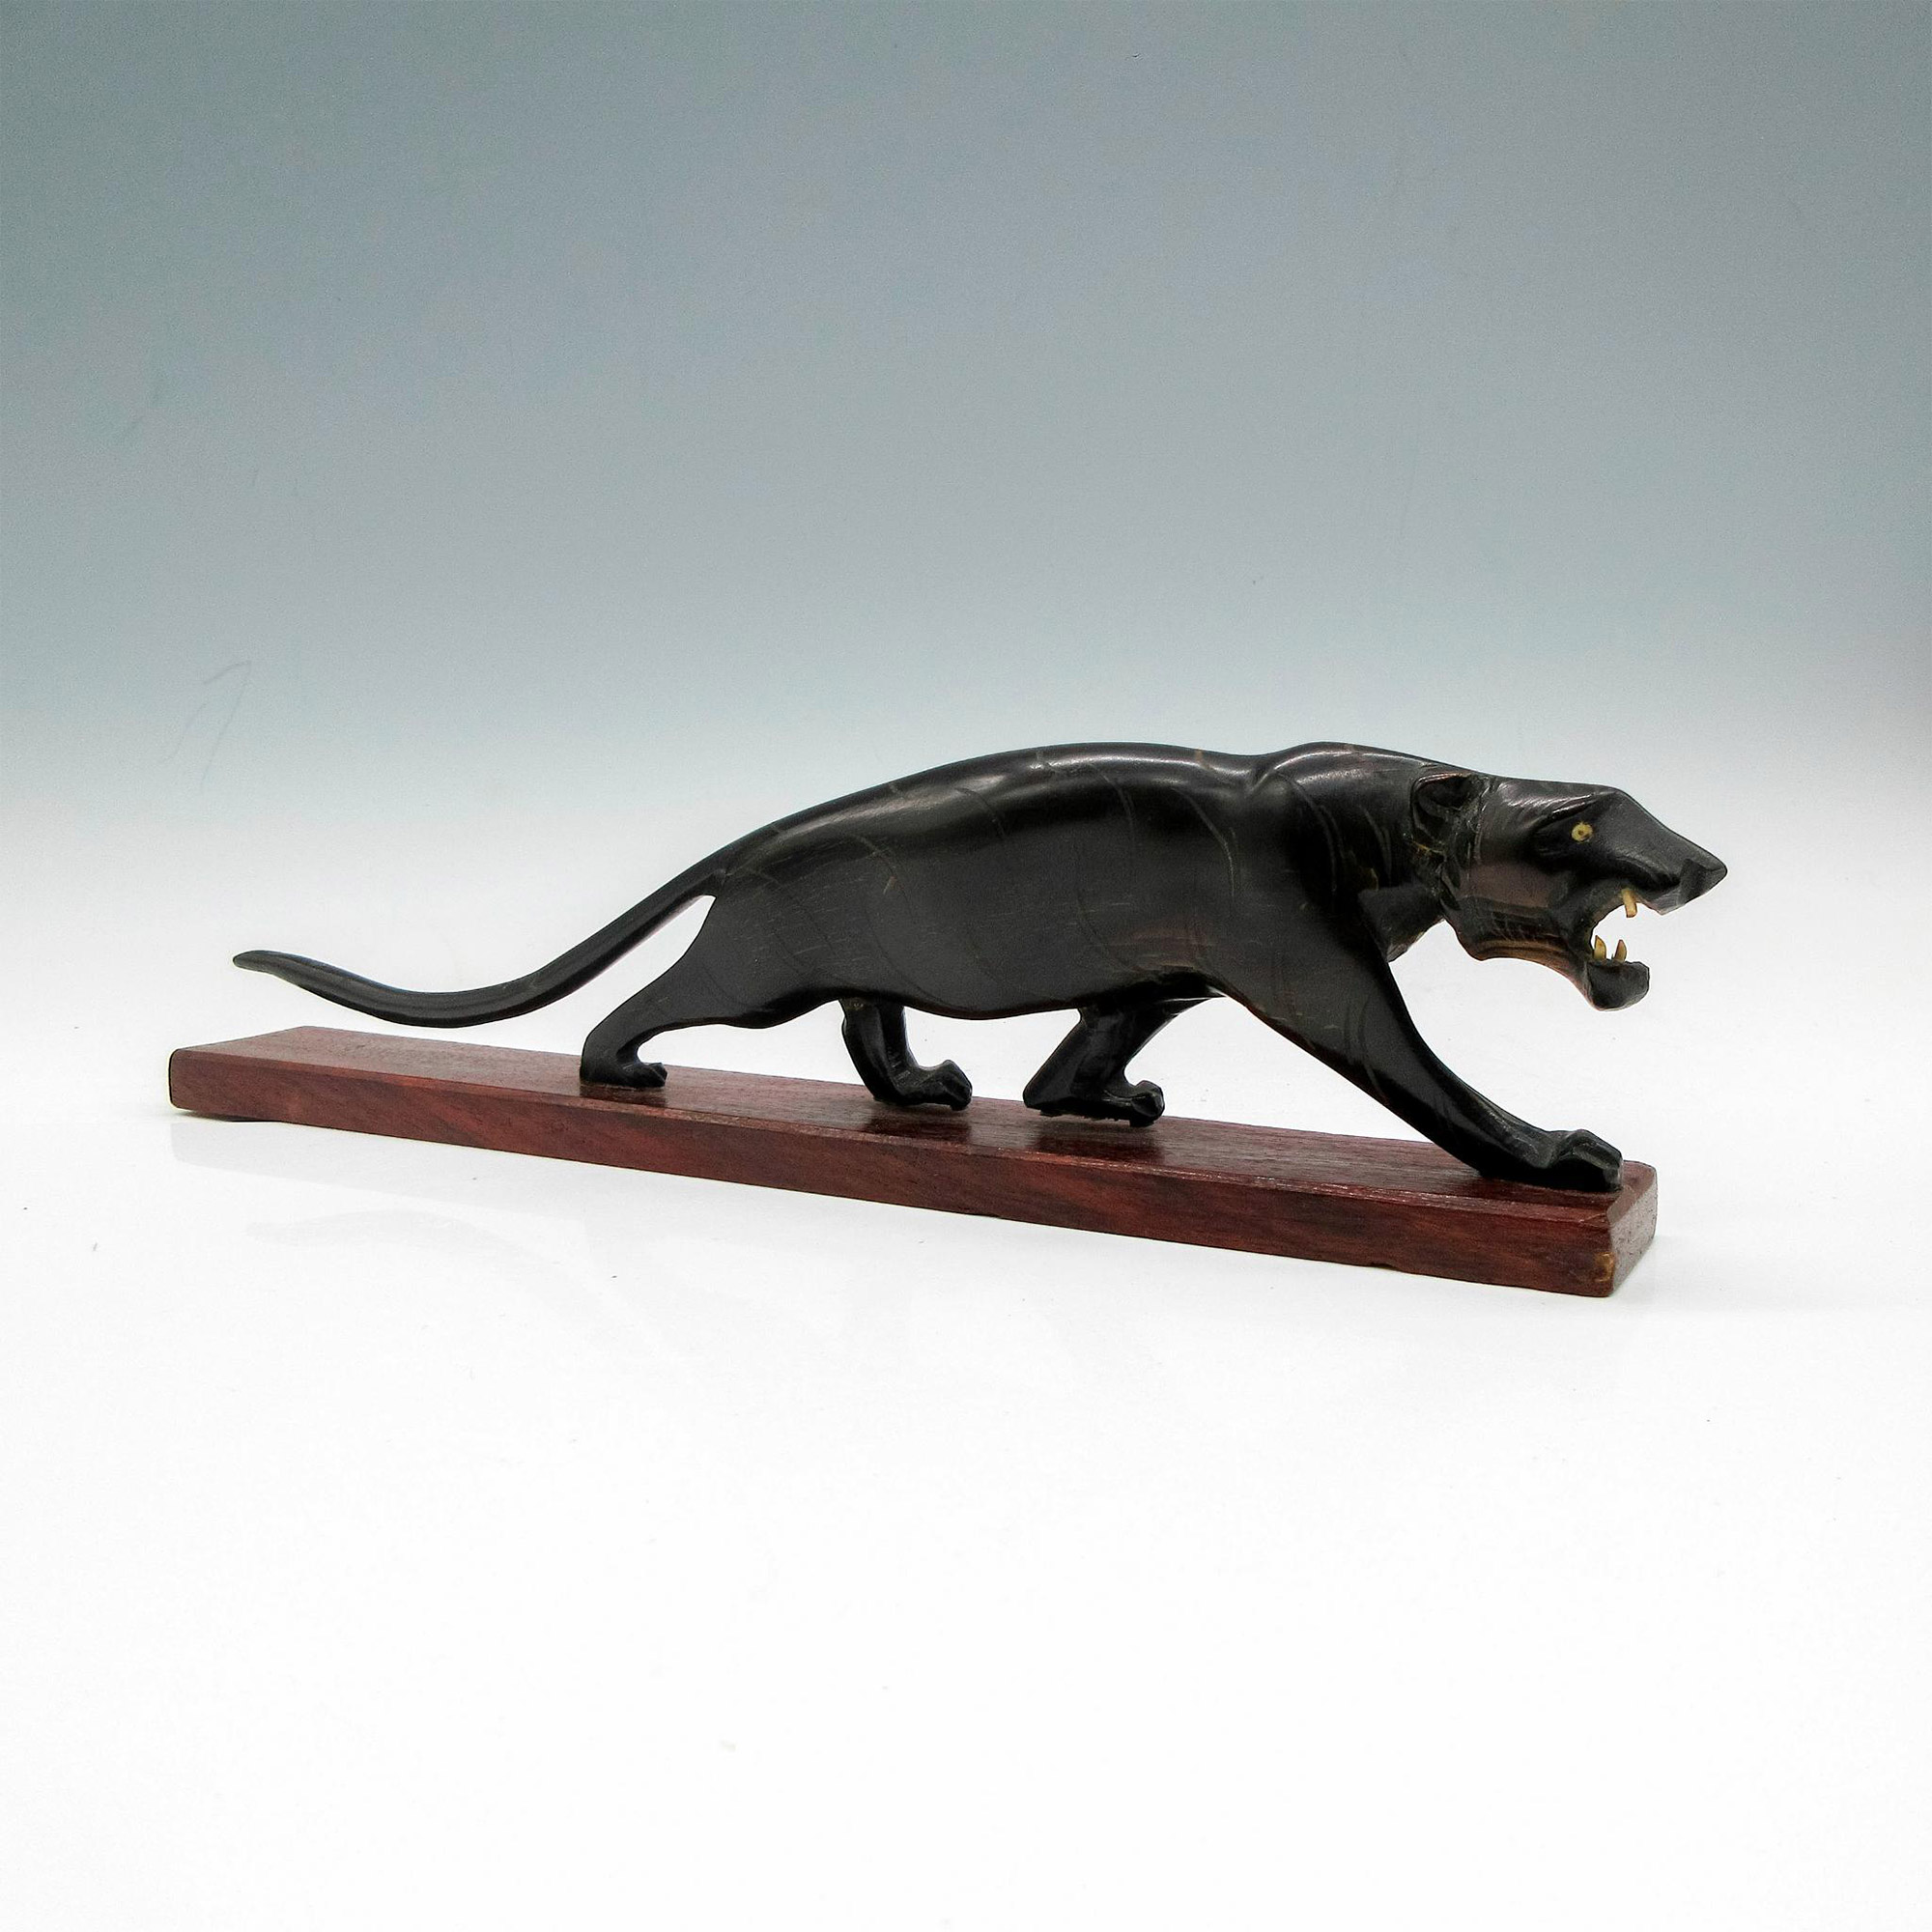 Hand Carved Wood Panther Figurine - Image 2 of 3